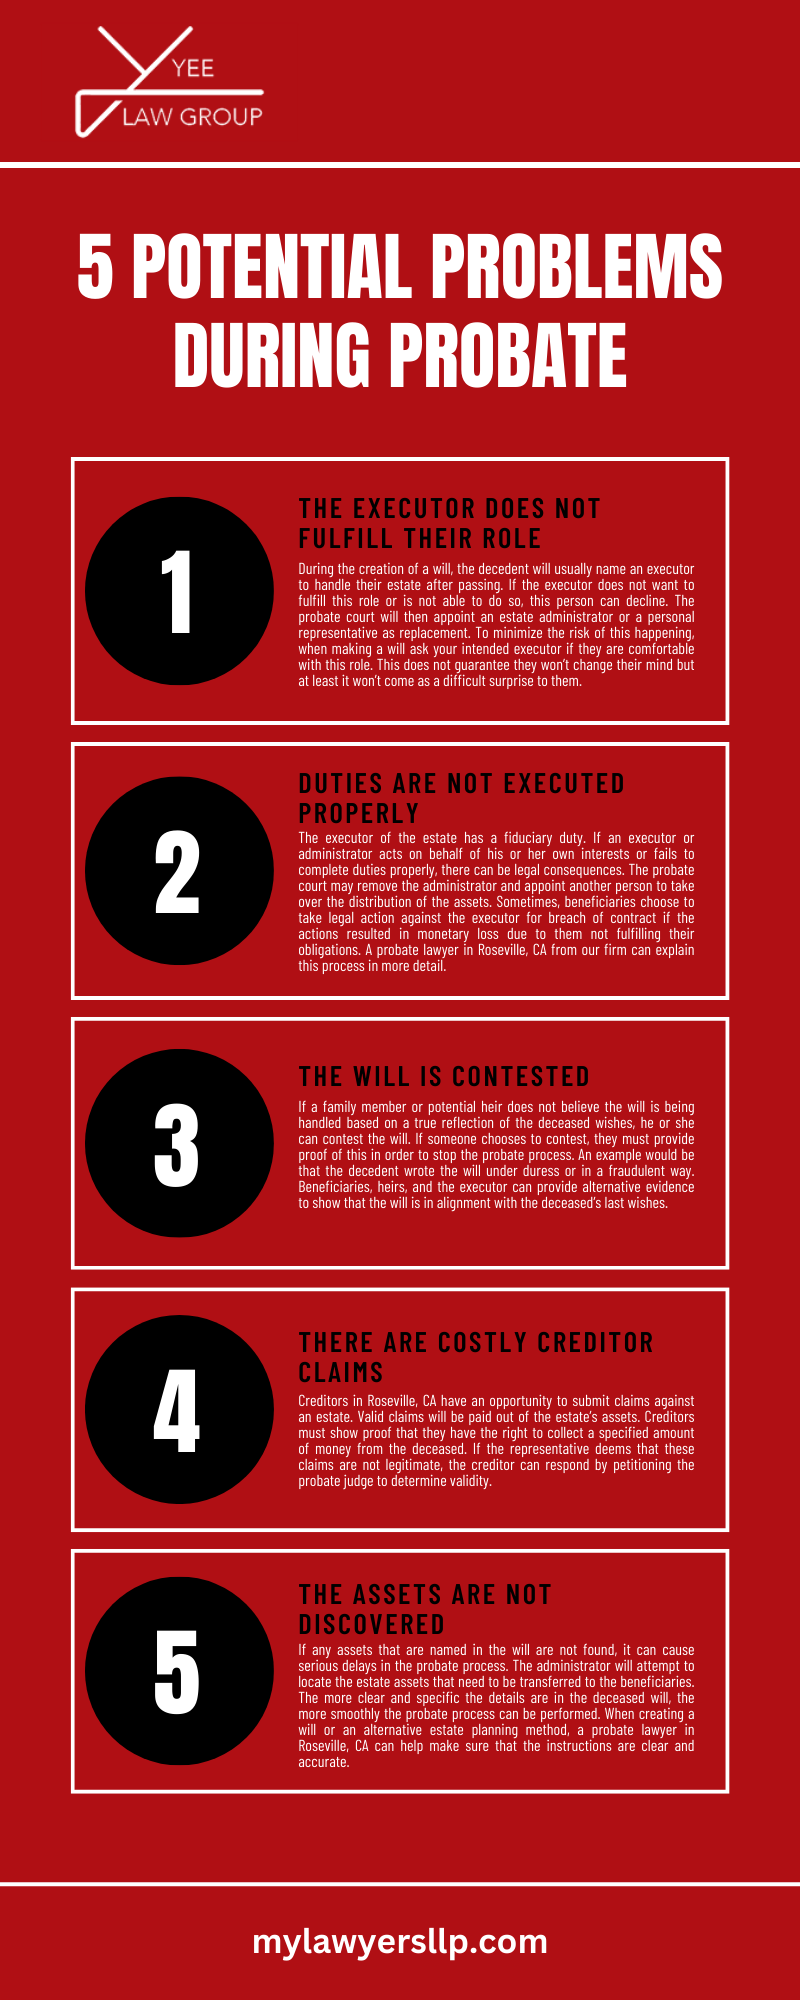 5 POTENTIAL PROBLEMS DURING PROBATE INFOGRAPHIC